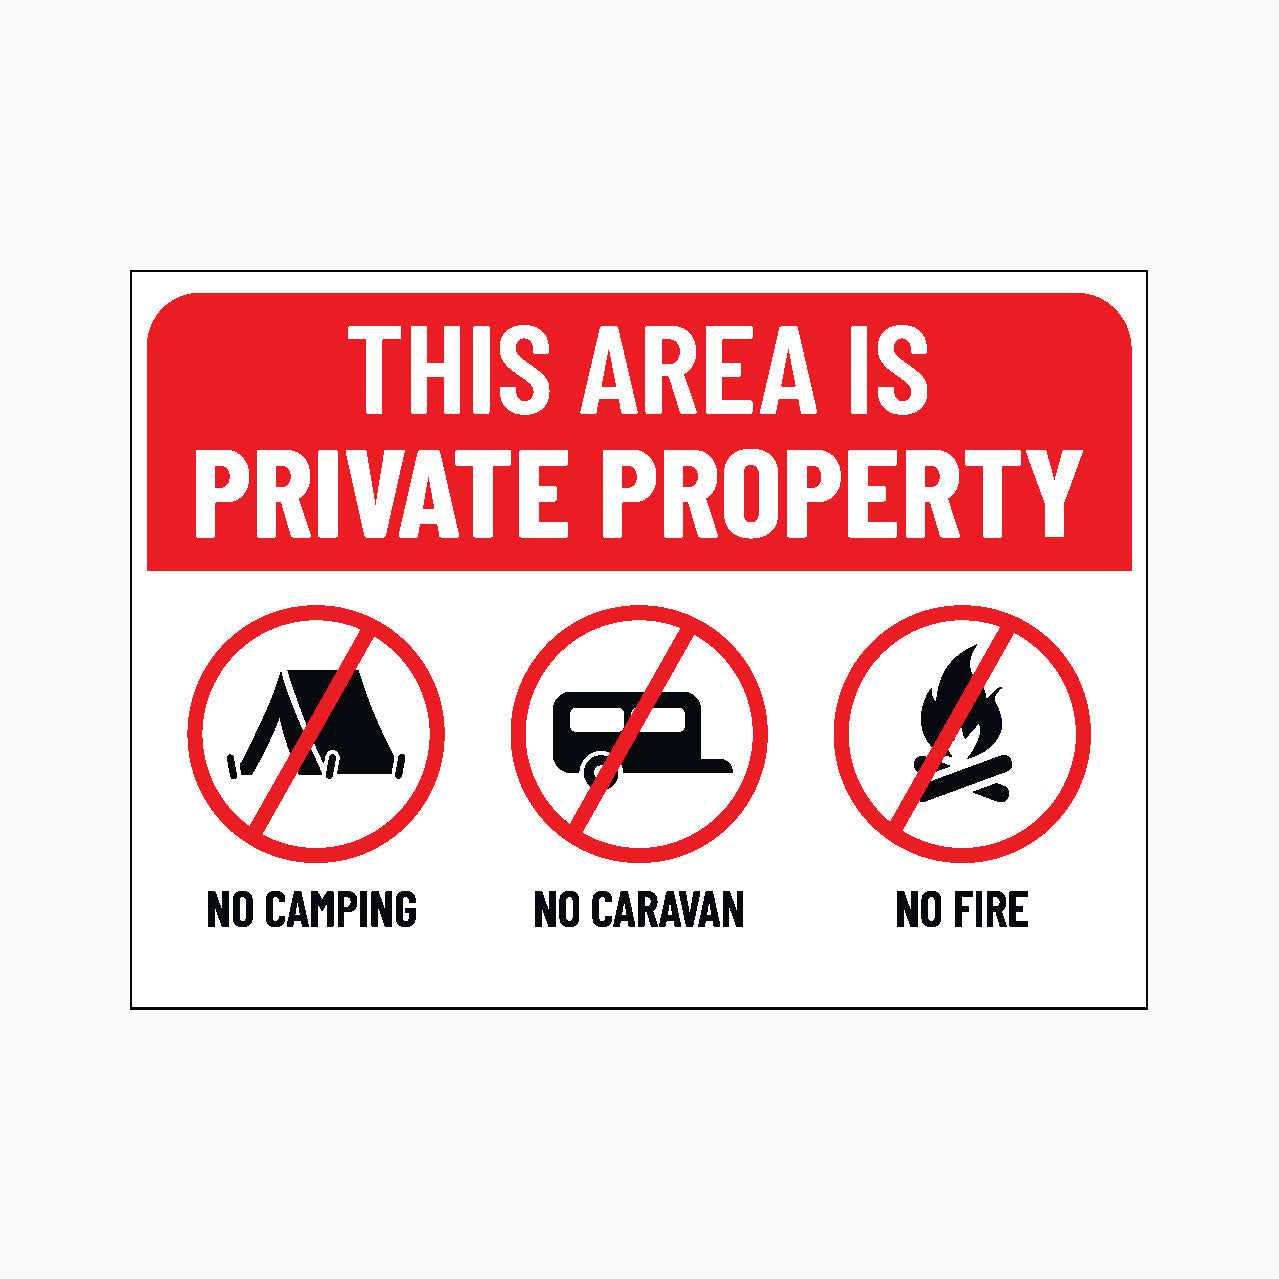 THIS AREA IS PRIVATE PROPERTY - NO CAMPING - NO CARAVAN - NO FIRE SIGN